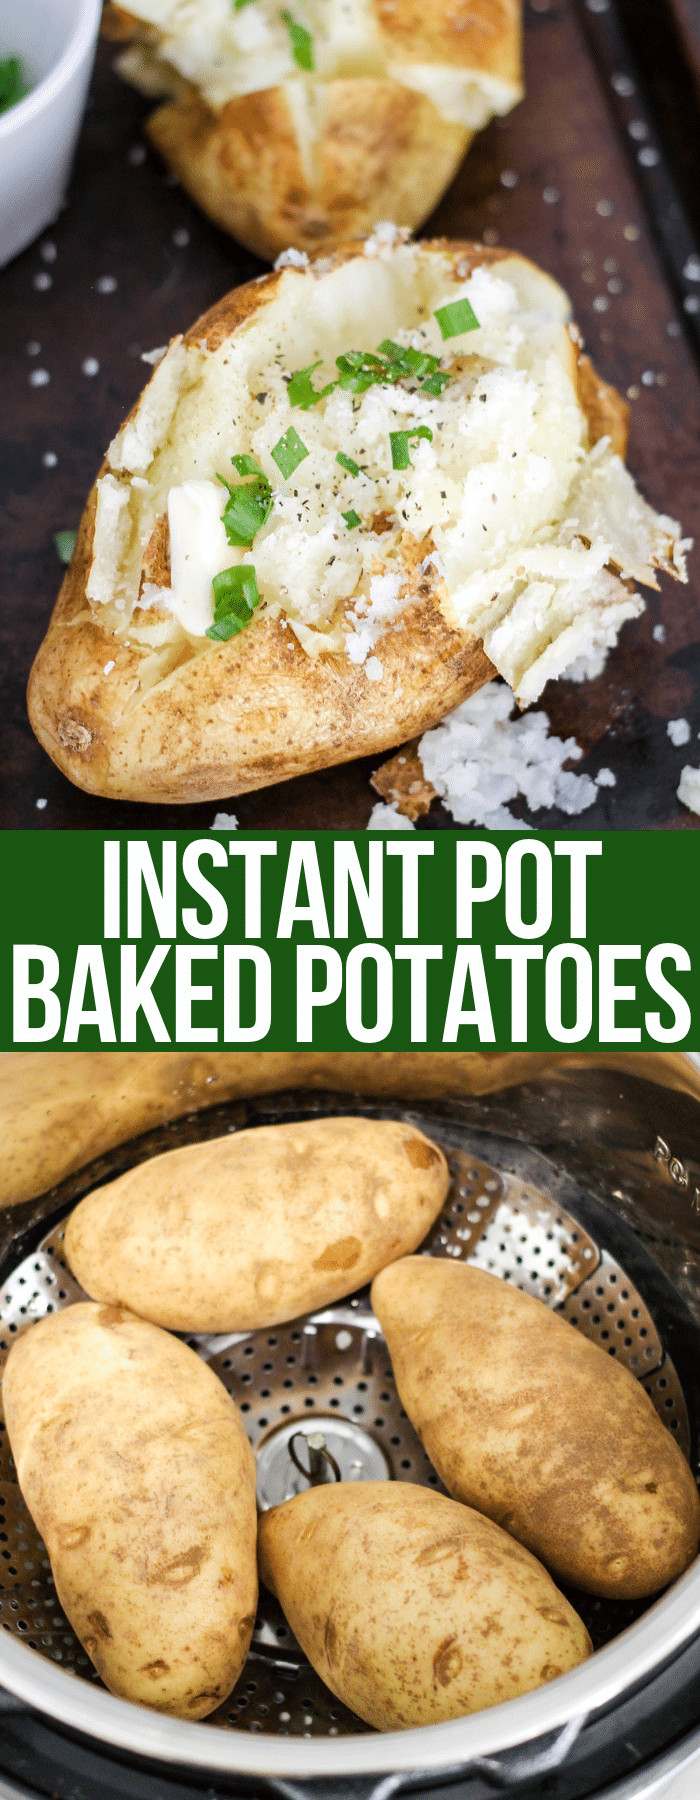 Baked Potato In Instant Pot
 Instant Pot Baked Potatoes with Crispy Skins